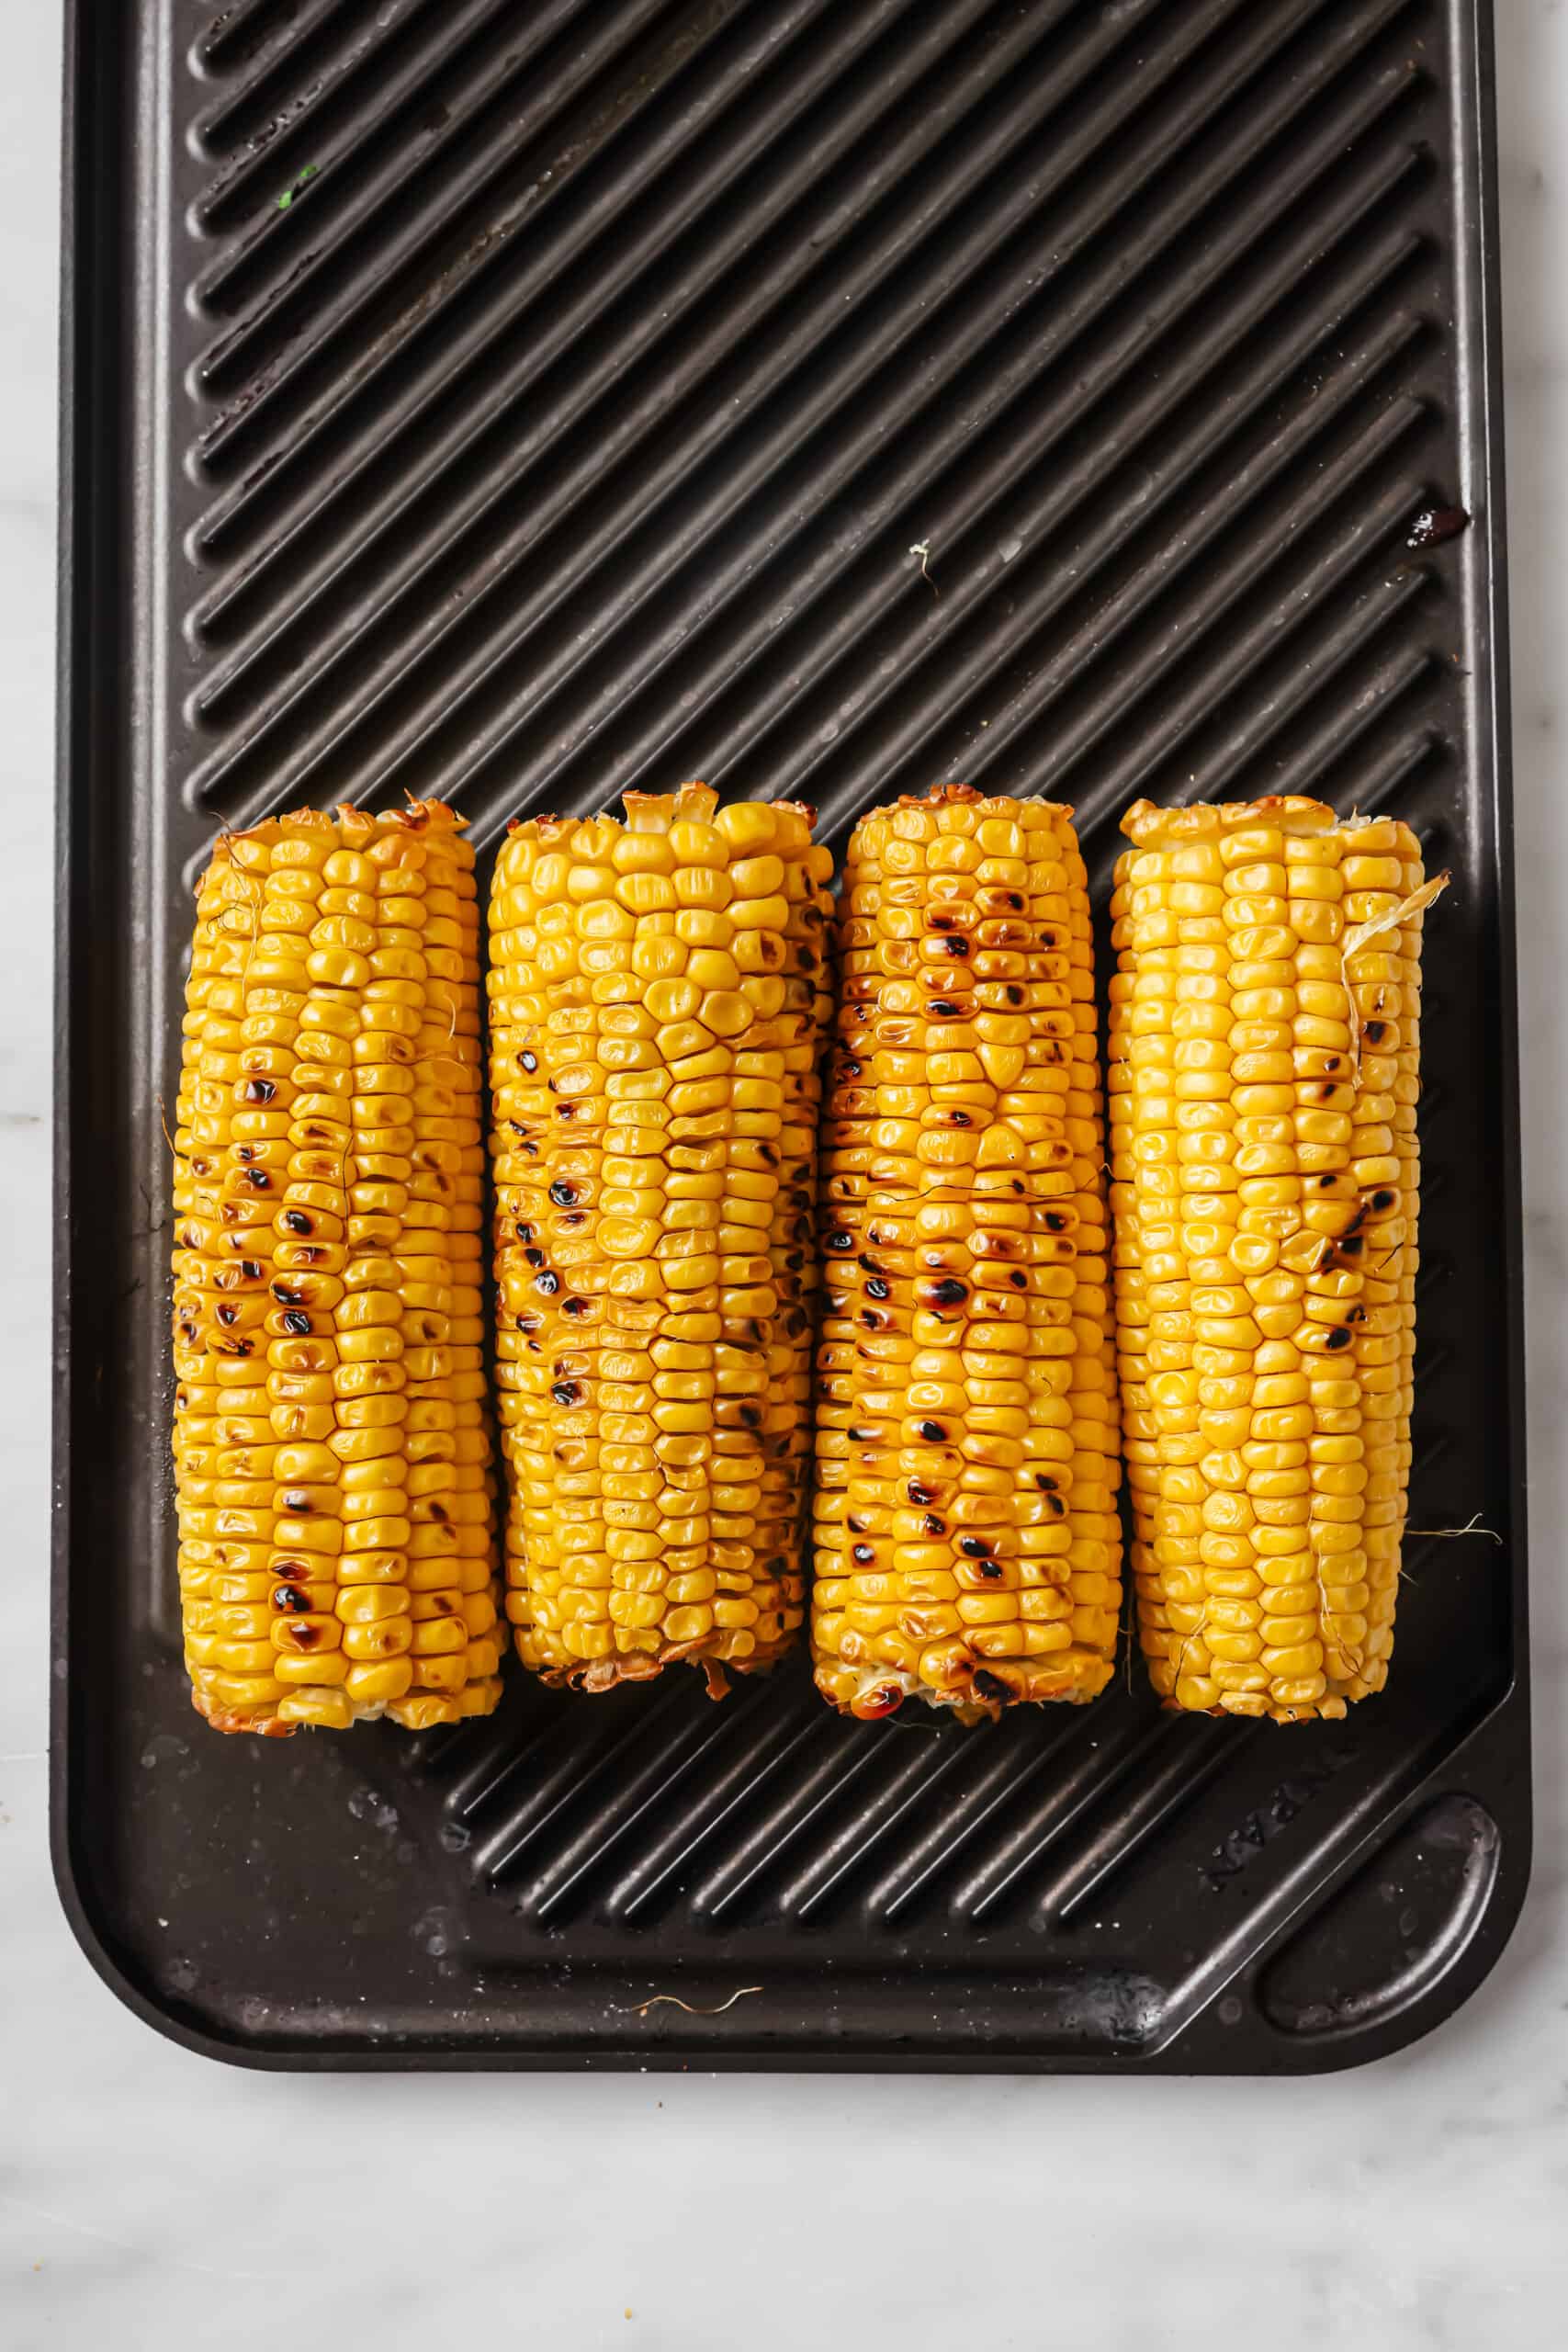 Grilling the corn.